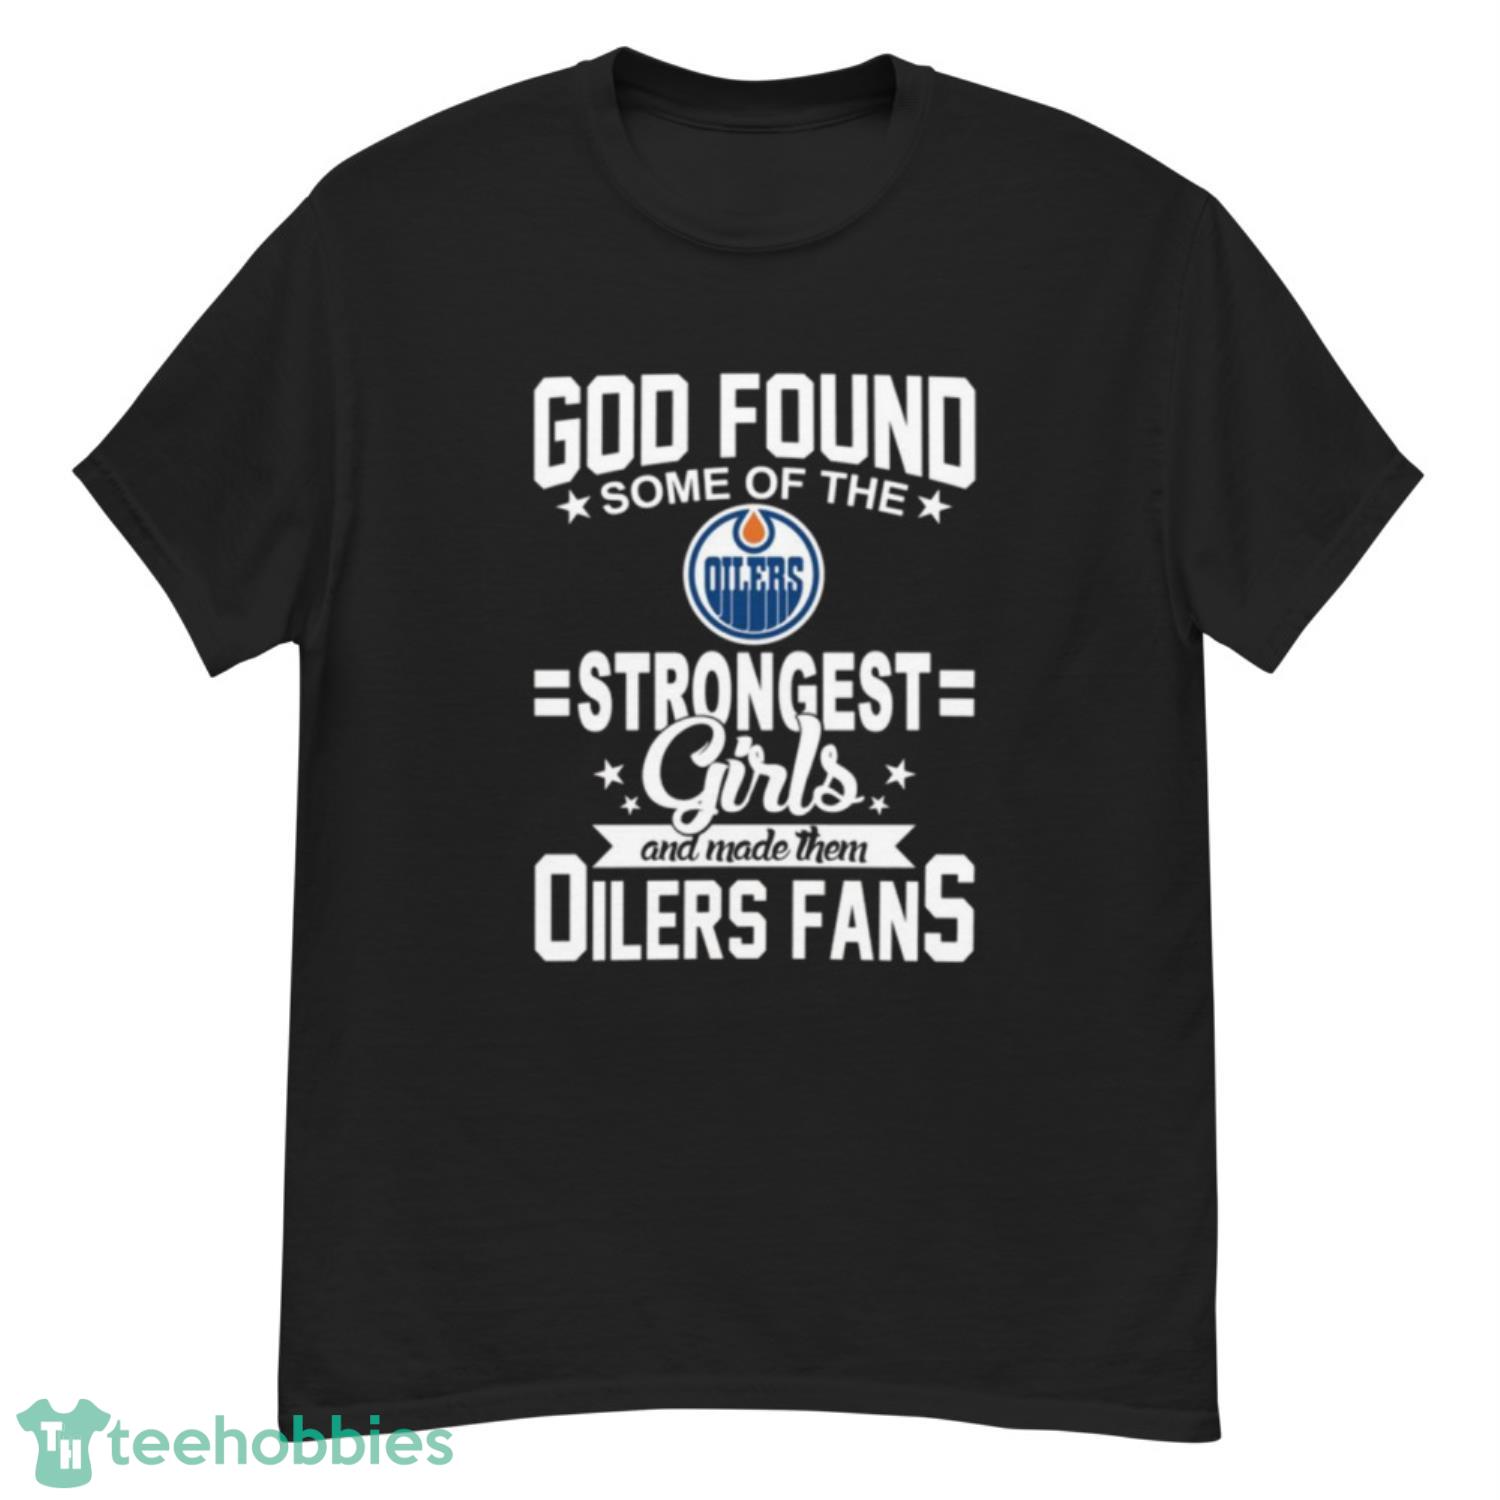 Edmonton Oilers NHL Football God Found Some Of The Strongest Girls Adoring Fans T Shirt - G500 Men’s Classic T-Shirt